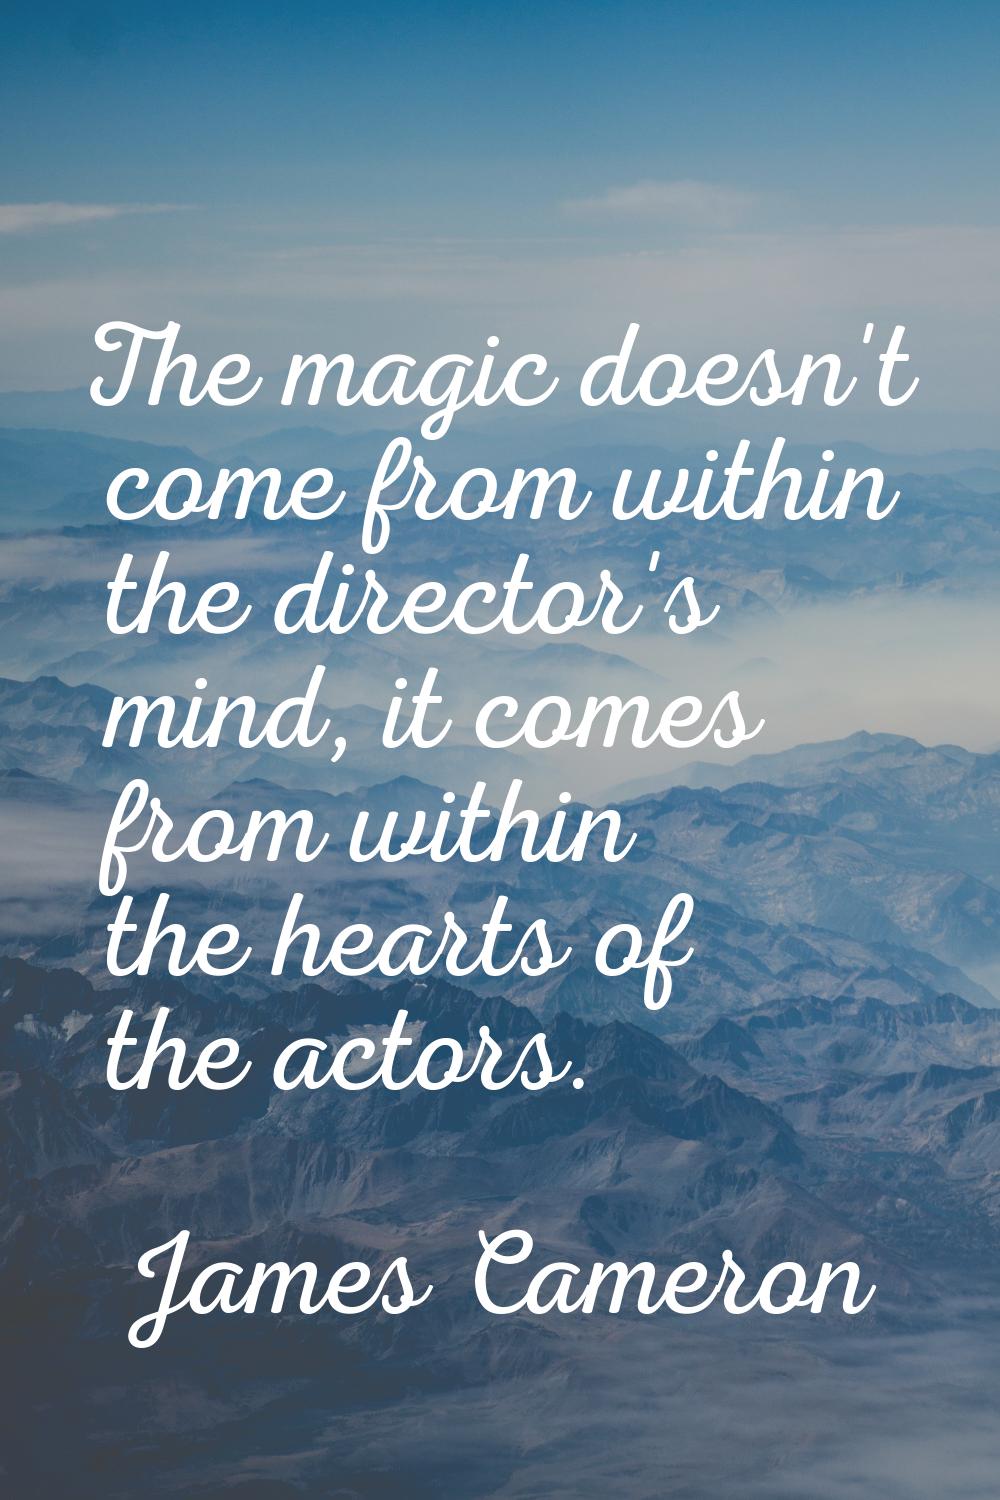 The magic doesn't come from within the director's mind, it comes from within the hearts of the acto